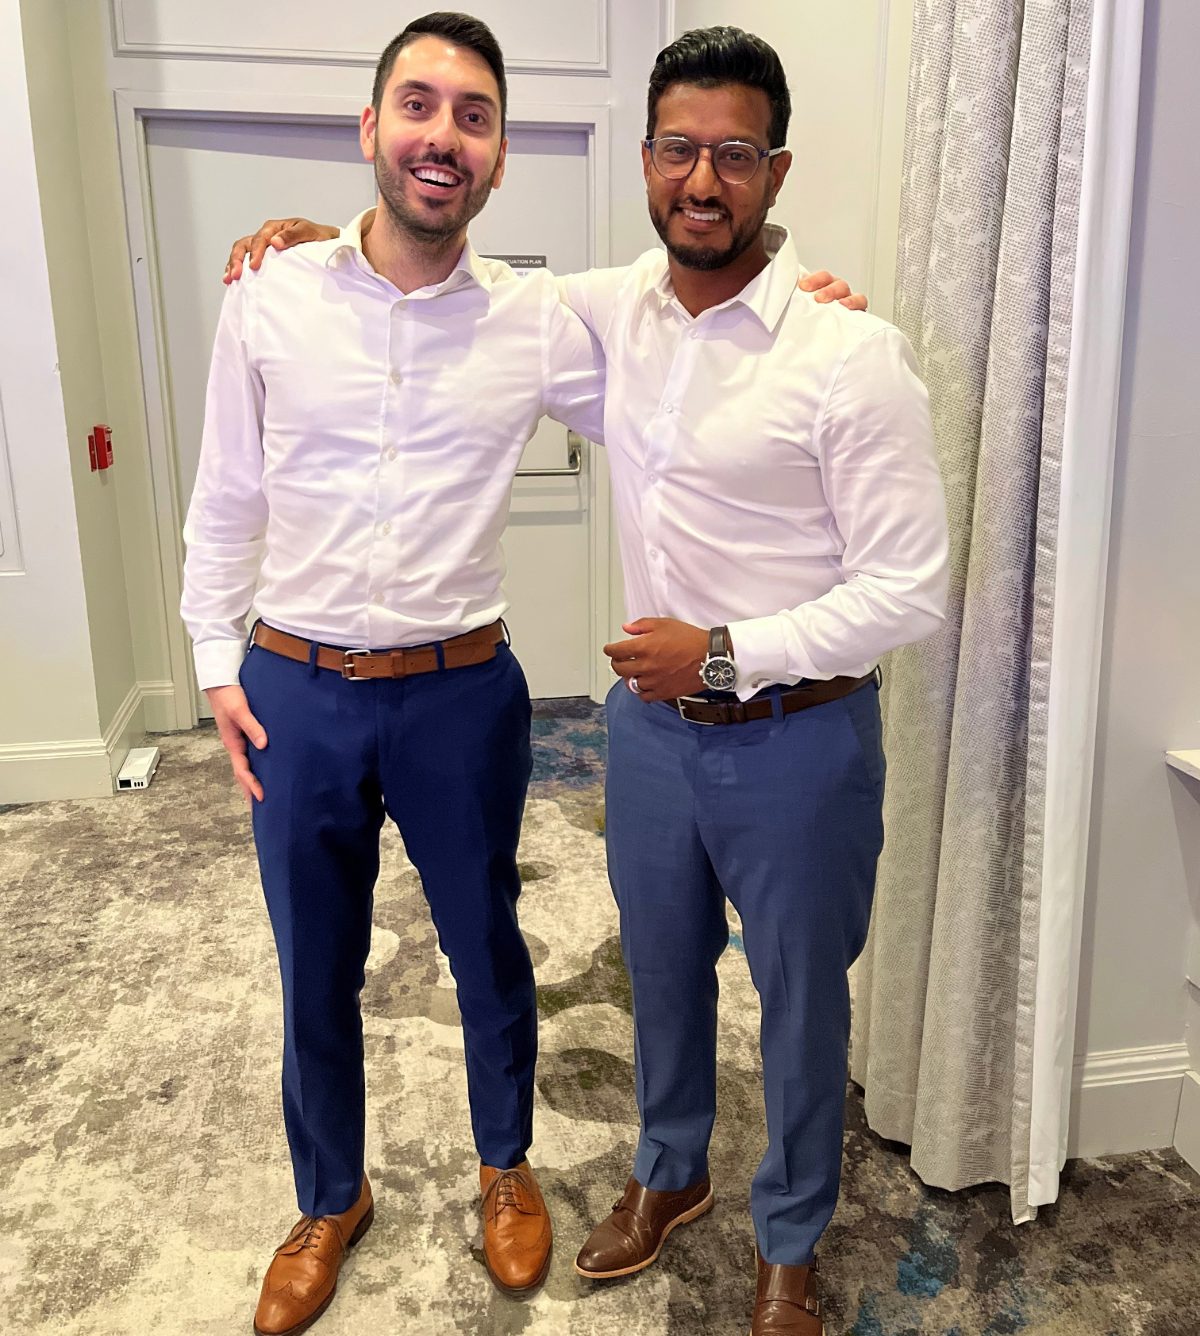 Two men dressed semi-formally in white shirts, blue pants and brown shoes stand indoors with their arms around each other's shoulders.